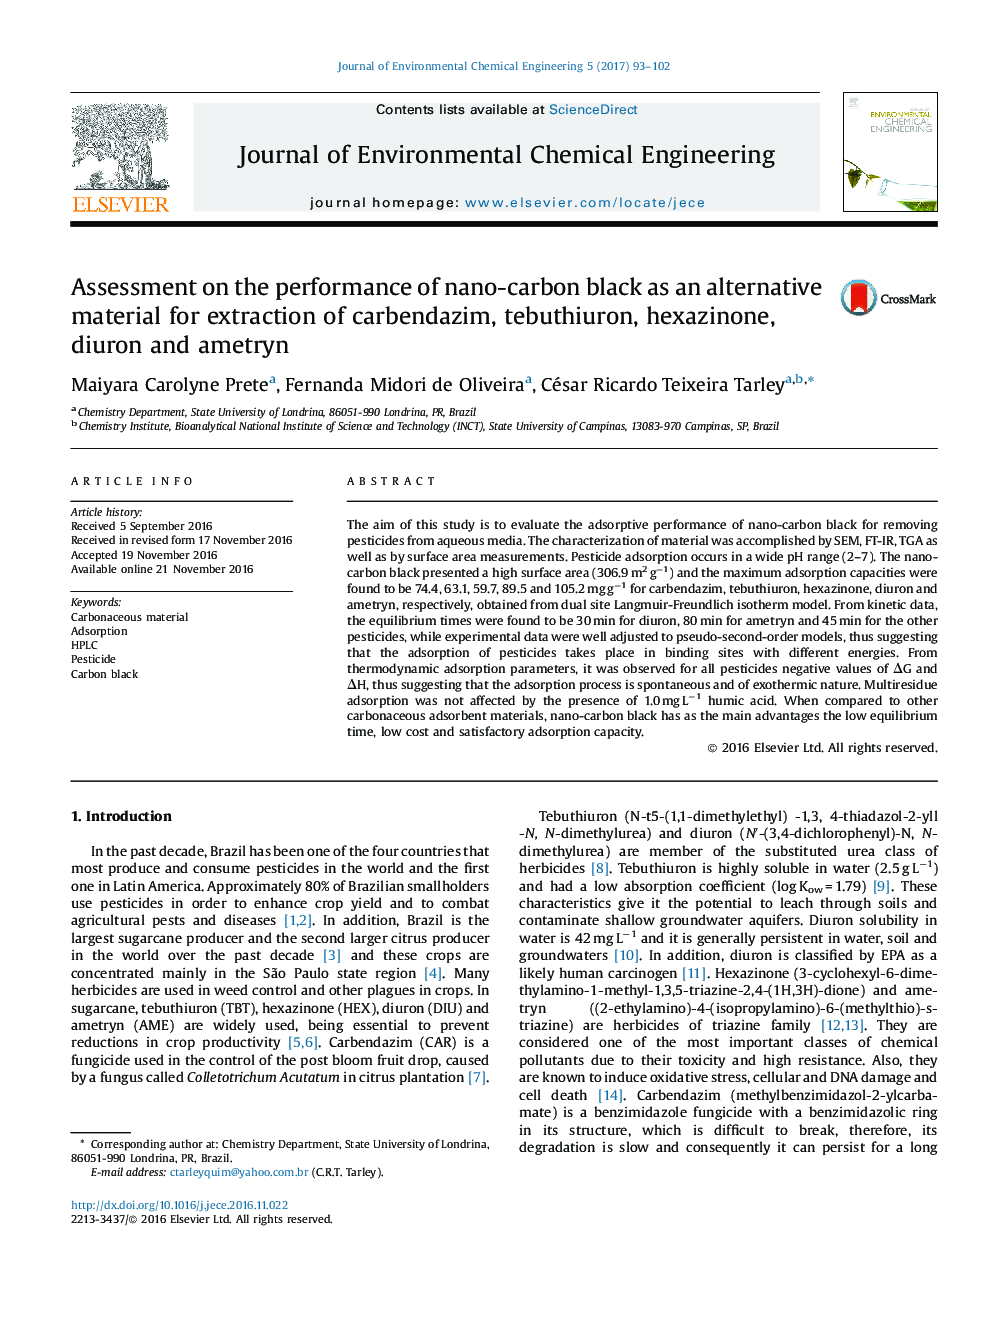 Assessment on the performance of nano-carbon black as an alternative material for extraction of carbendazim, tebuthiuron, hexazinone, diuron and ametryn